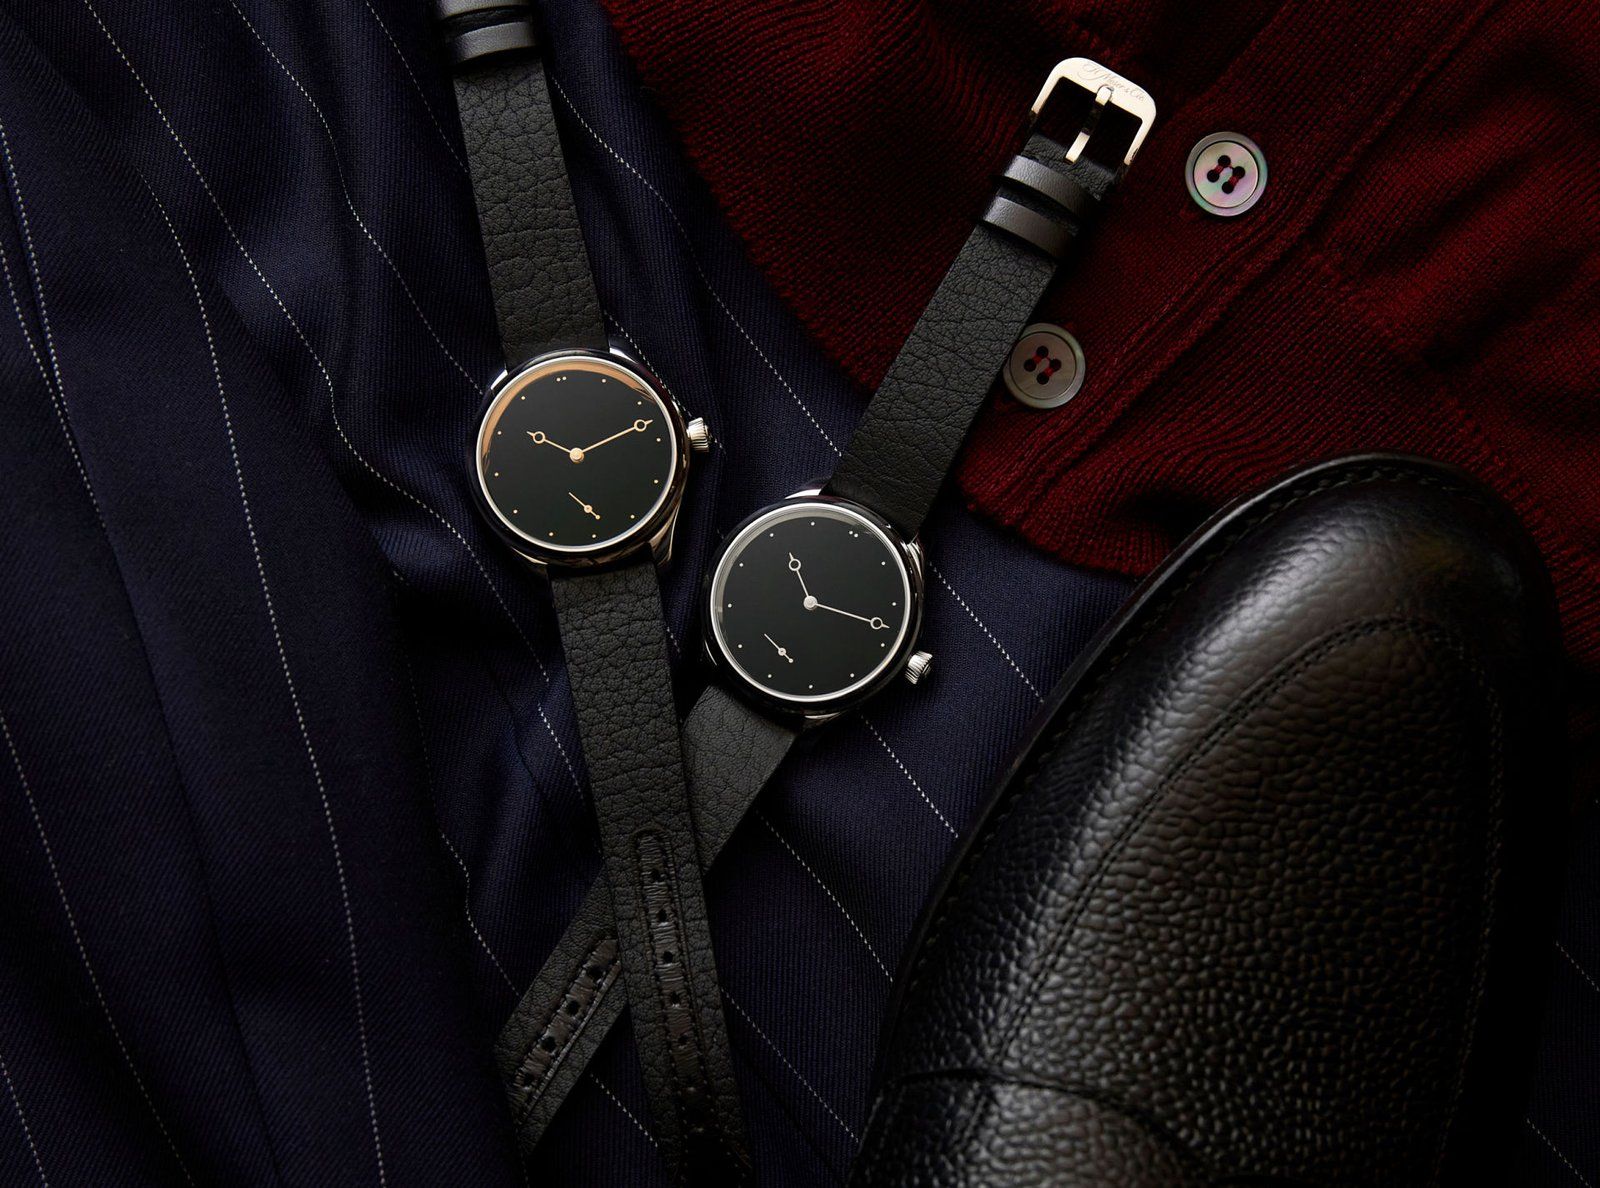 H. Moser & Cie - Endeavour Small Seconds Total Eclipse X The Armoury watch Two Limited Editions